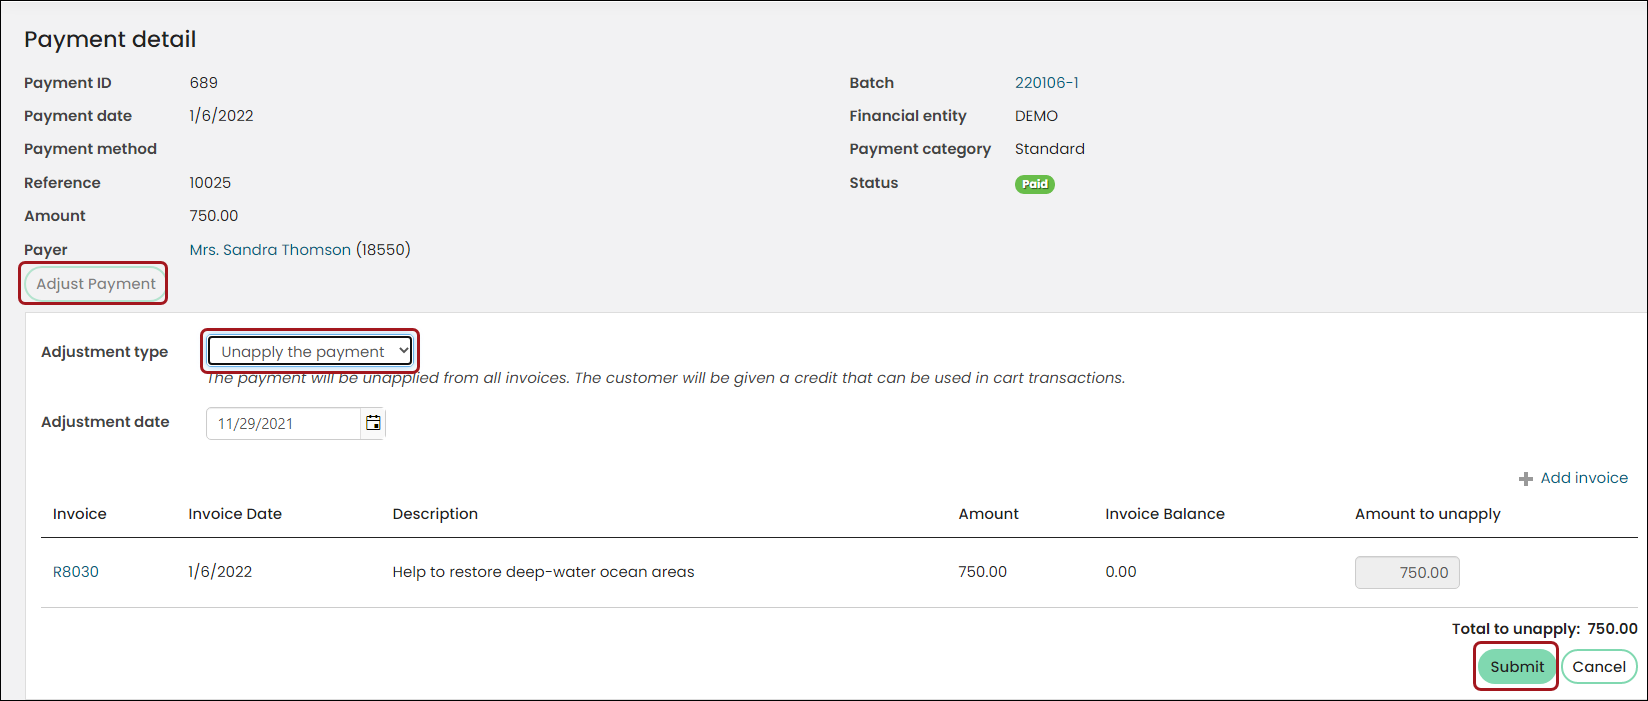 Payment detail with "Adjust Payment" selected and the adjustment type set to "Unapply the payment"